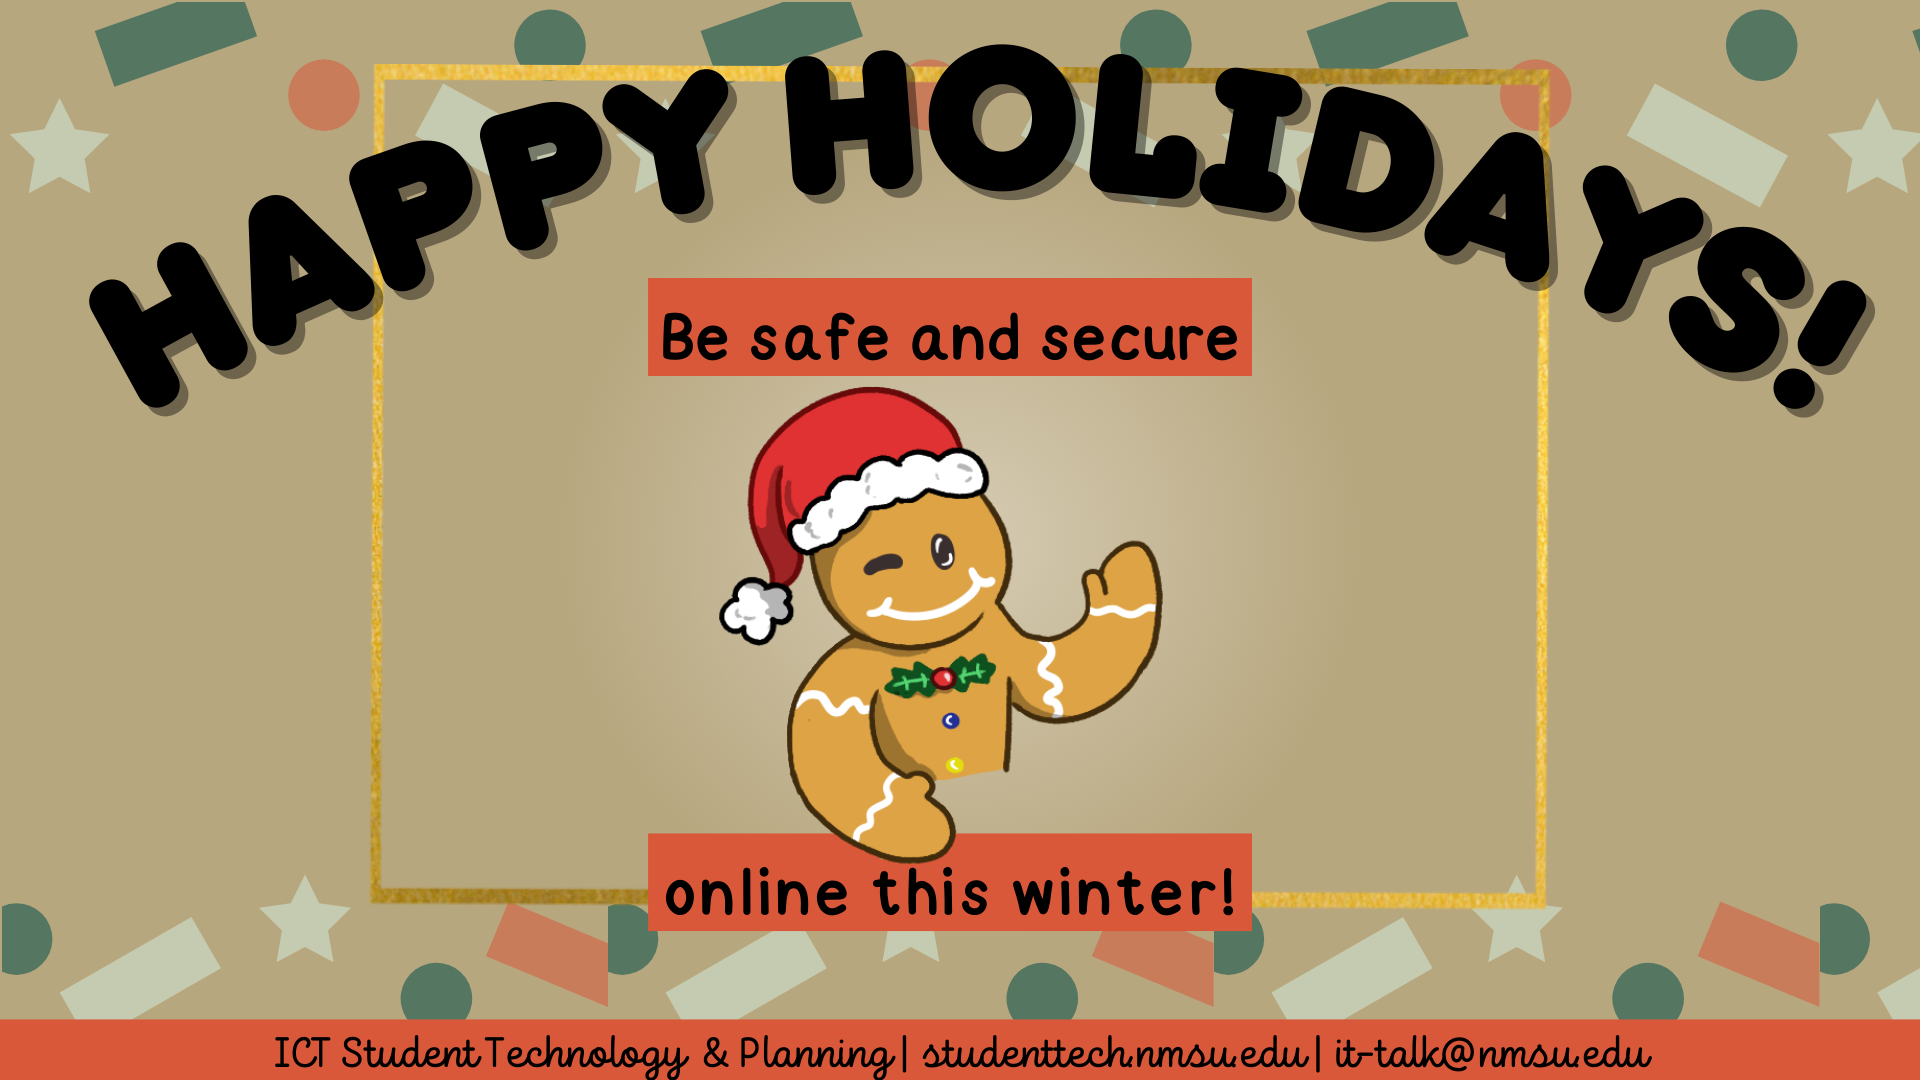 Happy Holidays! Be safe and secure online this winter!